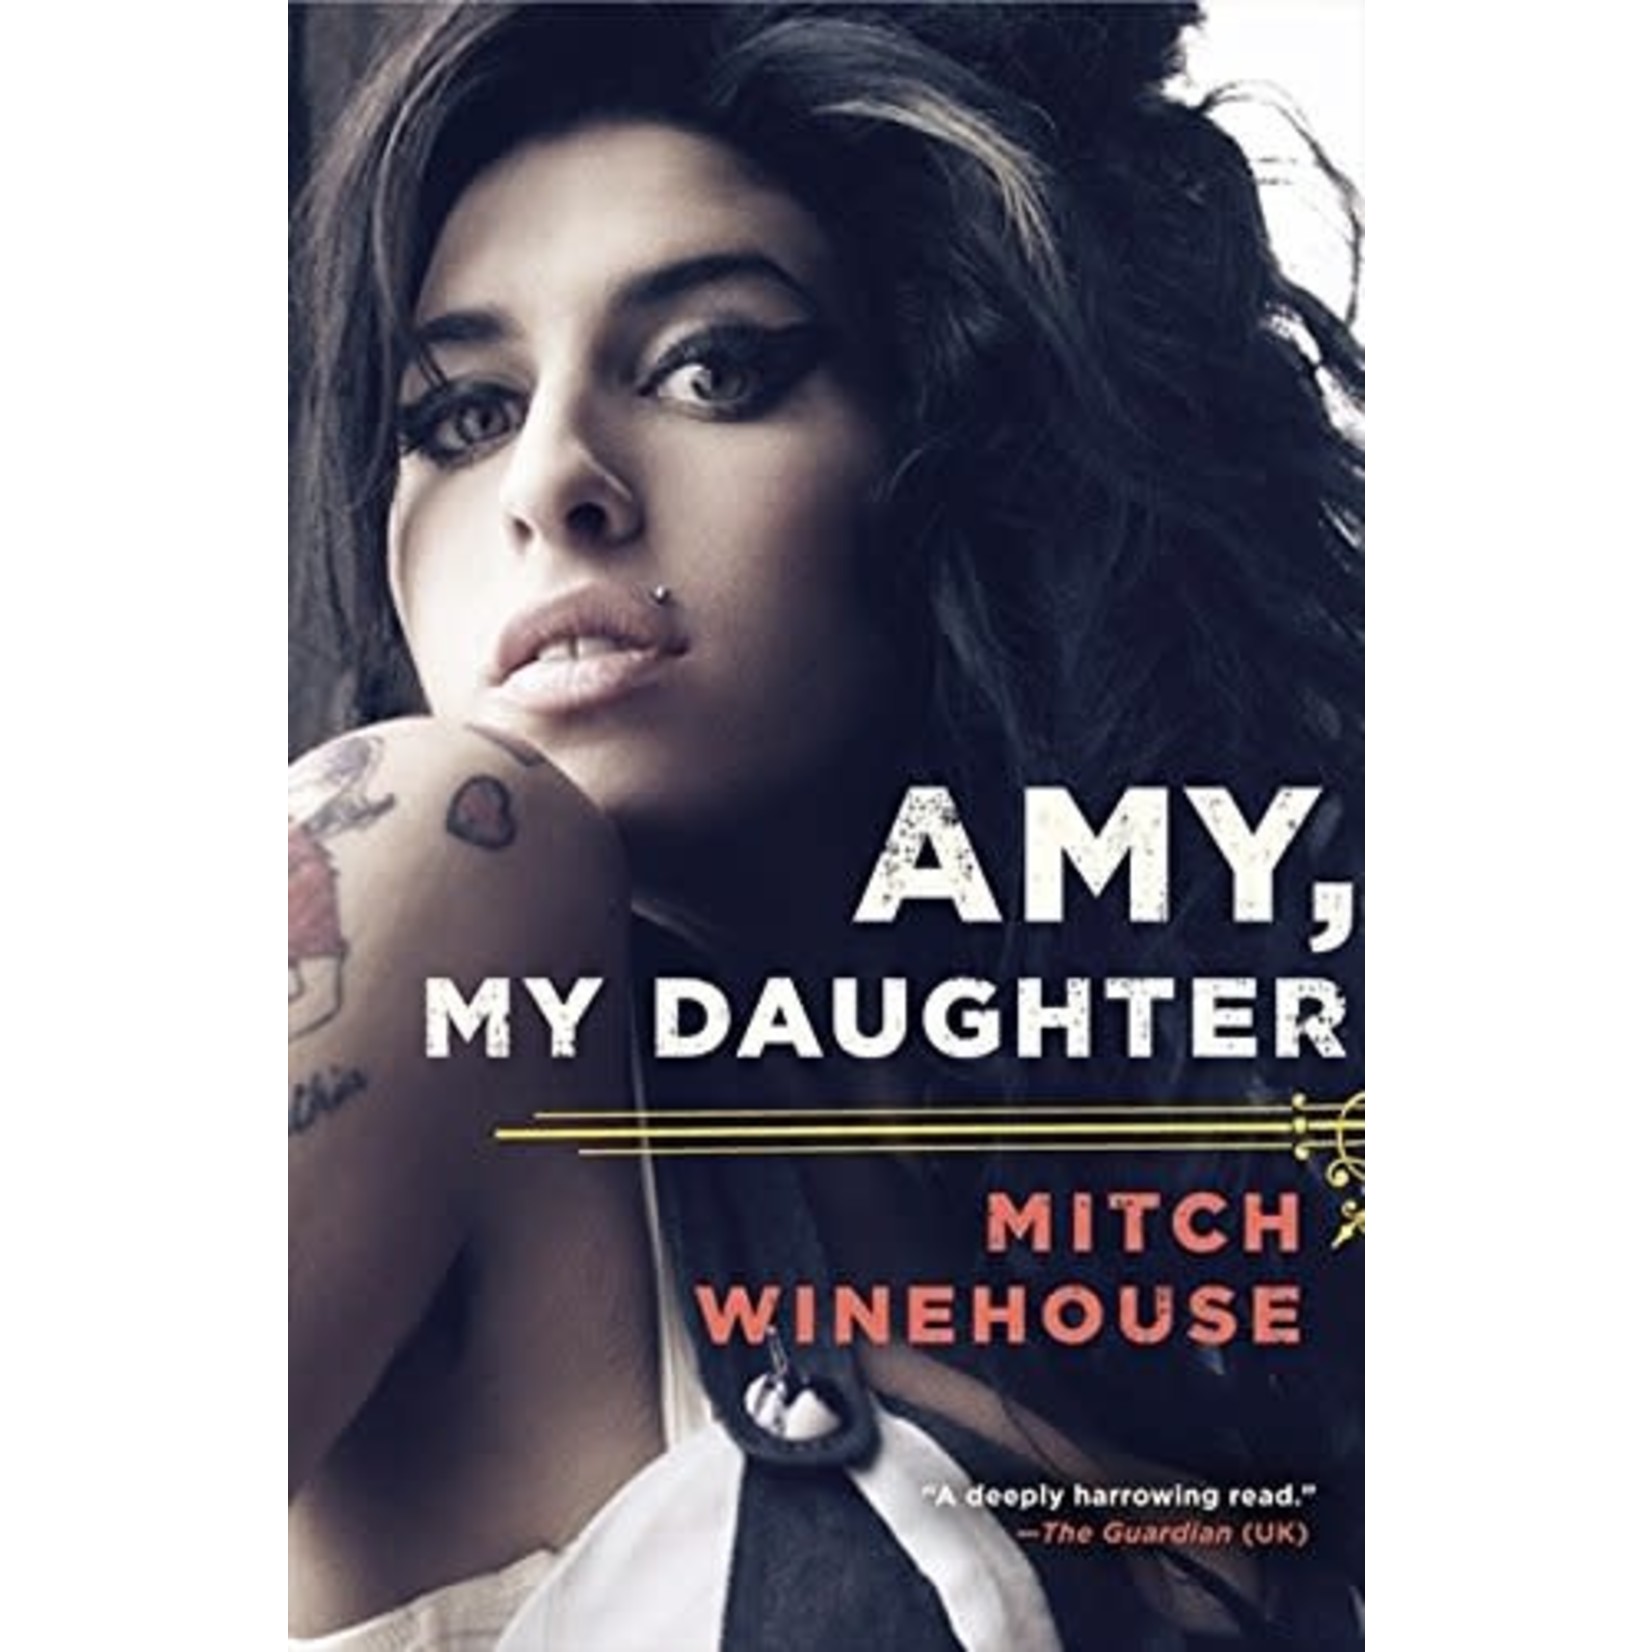 Amy Winehouse - Amy, My Daughter [Book]